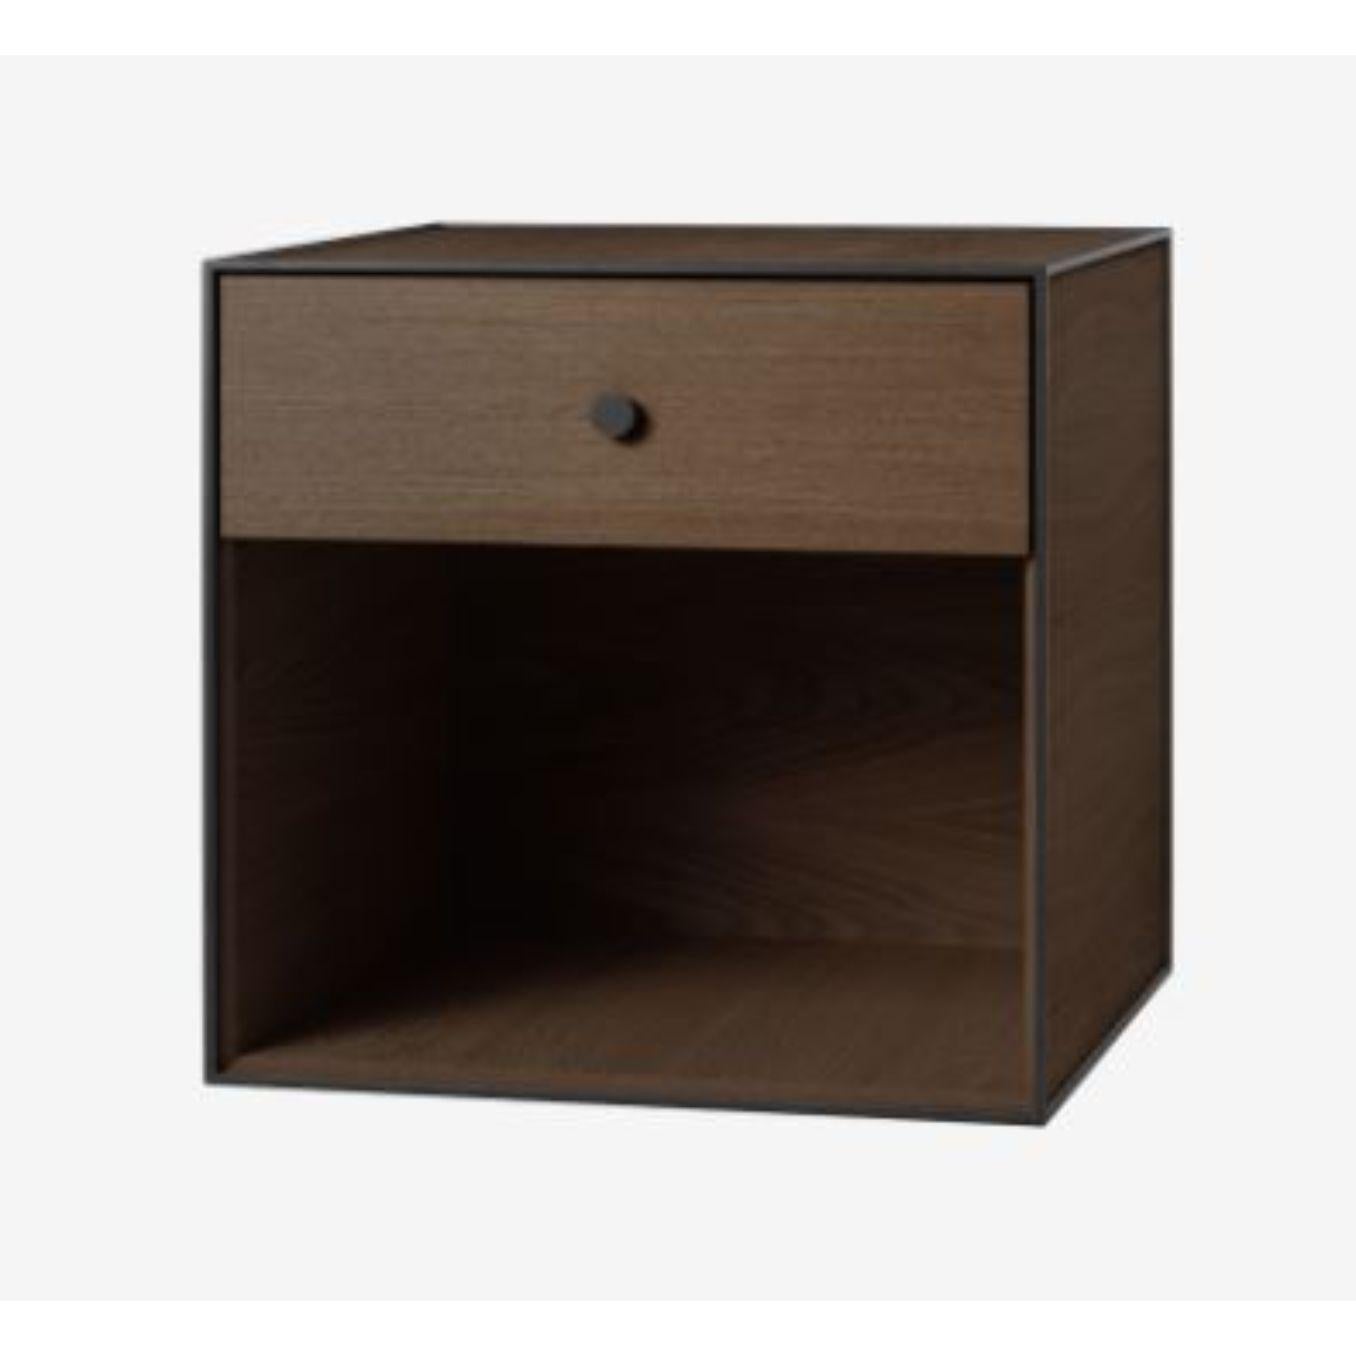 49 Smoked oak frame box with 1 drawer by Lassen
Dimensions: d 49 x w 42 x h 49 cm 
Materials: Finér, Melamin, Melamin, Melamine, Metal, Veneer, Oak
Also available in different colors and dimensions. 
Weight: 15 Kg


By Lassen is a Danish